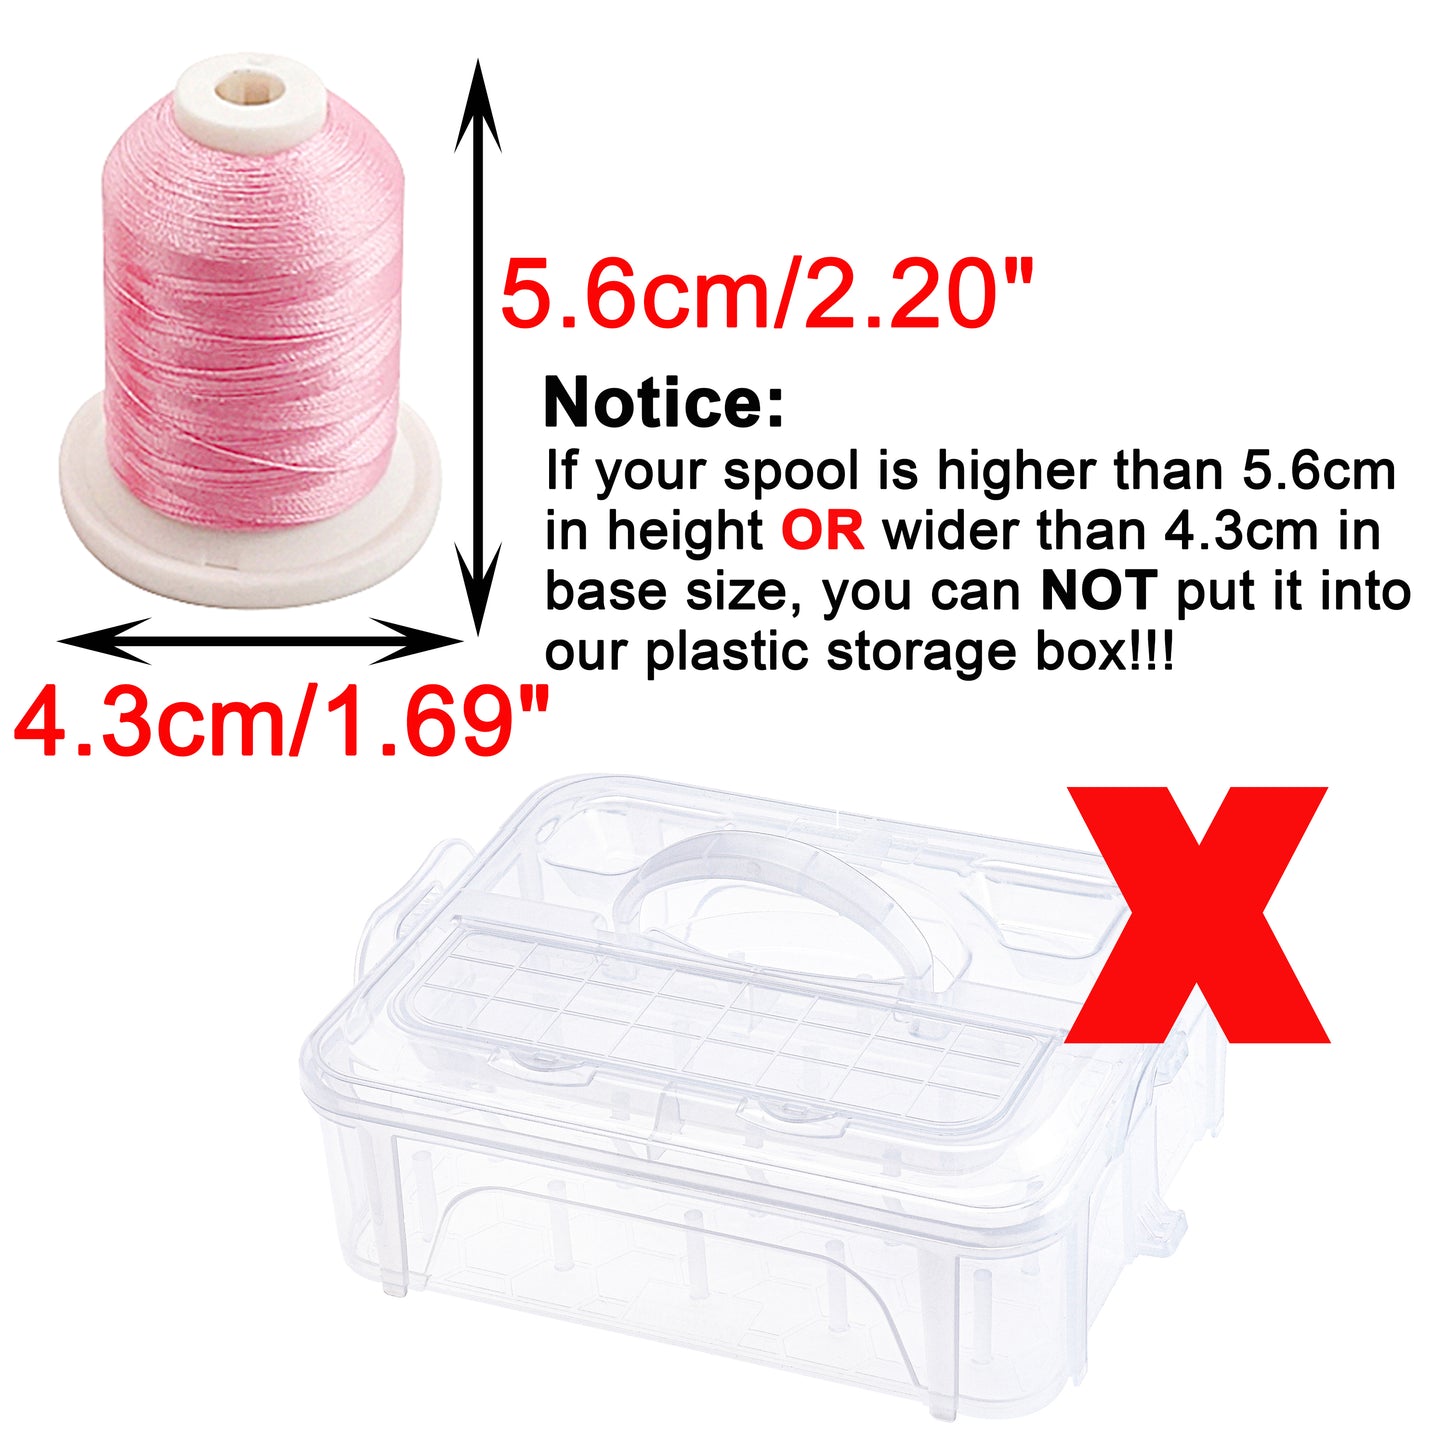 New brothread 3 Layers Stackable Clear Storage Box/Organizer for Holding 60 Spools Home Embroidery & Sewing Thread and Other Embroidery Sewing Crafts (Spool Size Requirement: H≤2.2"; W≤1.69")